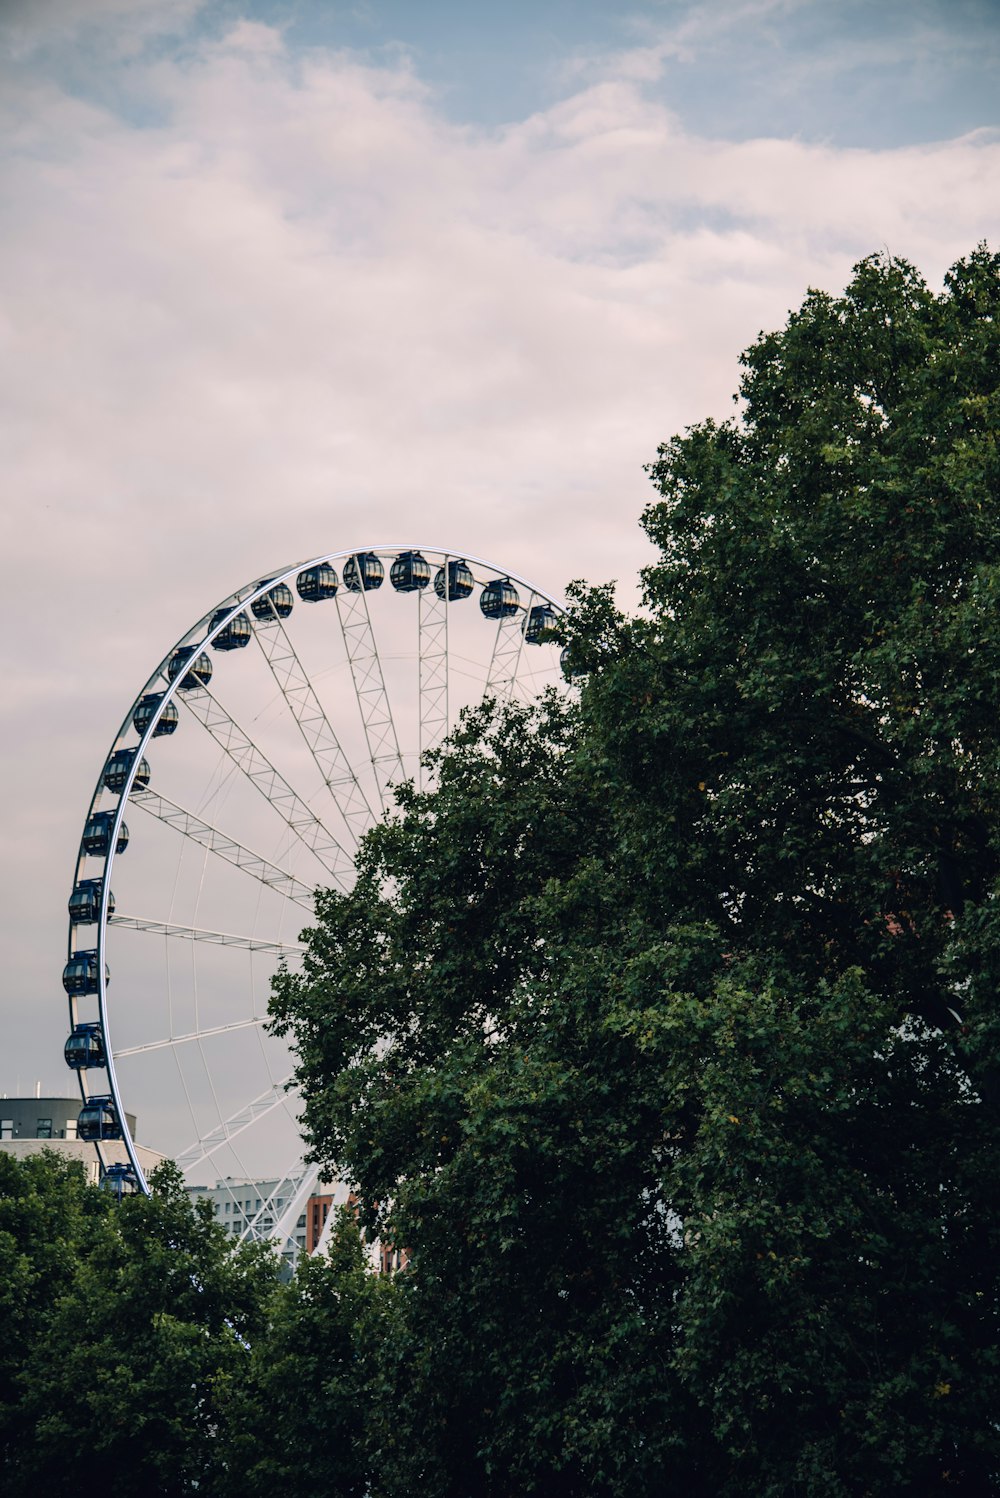 a large ferris wheel sitting next to a lush green forest